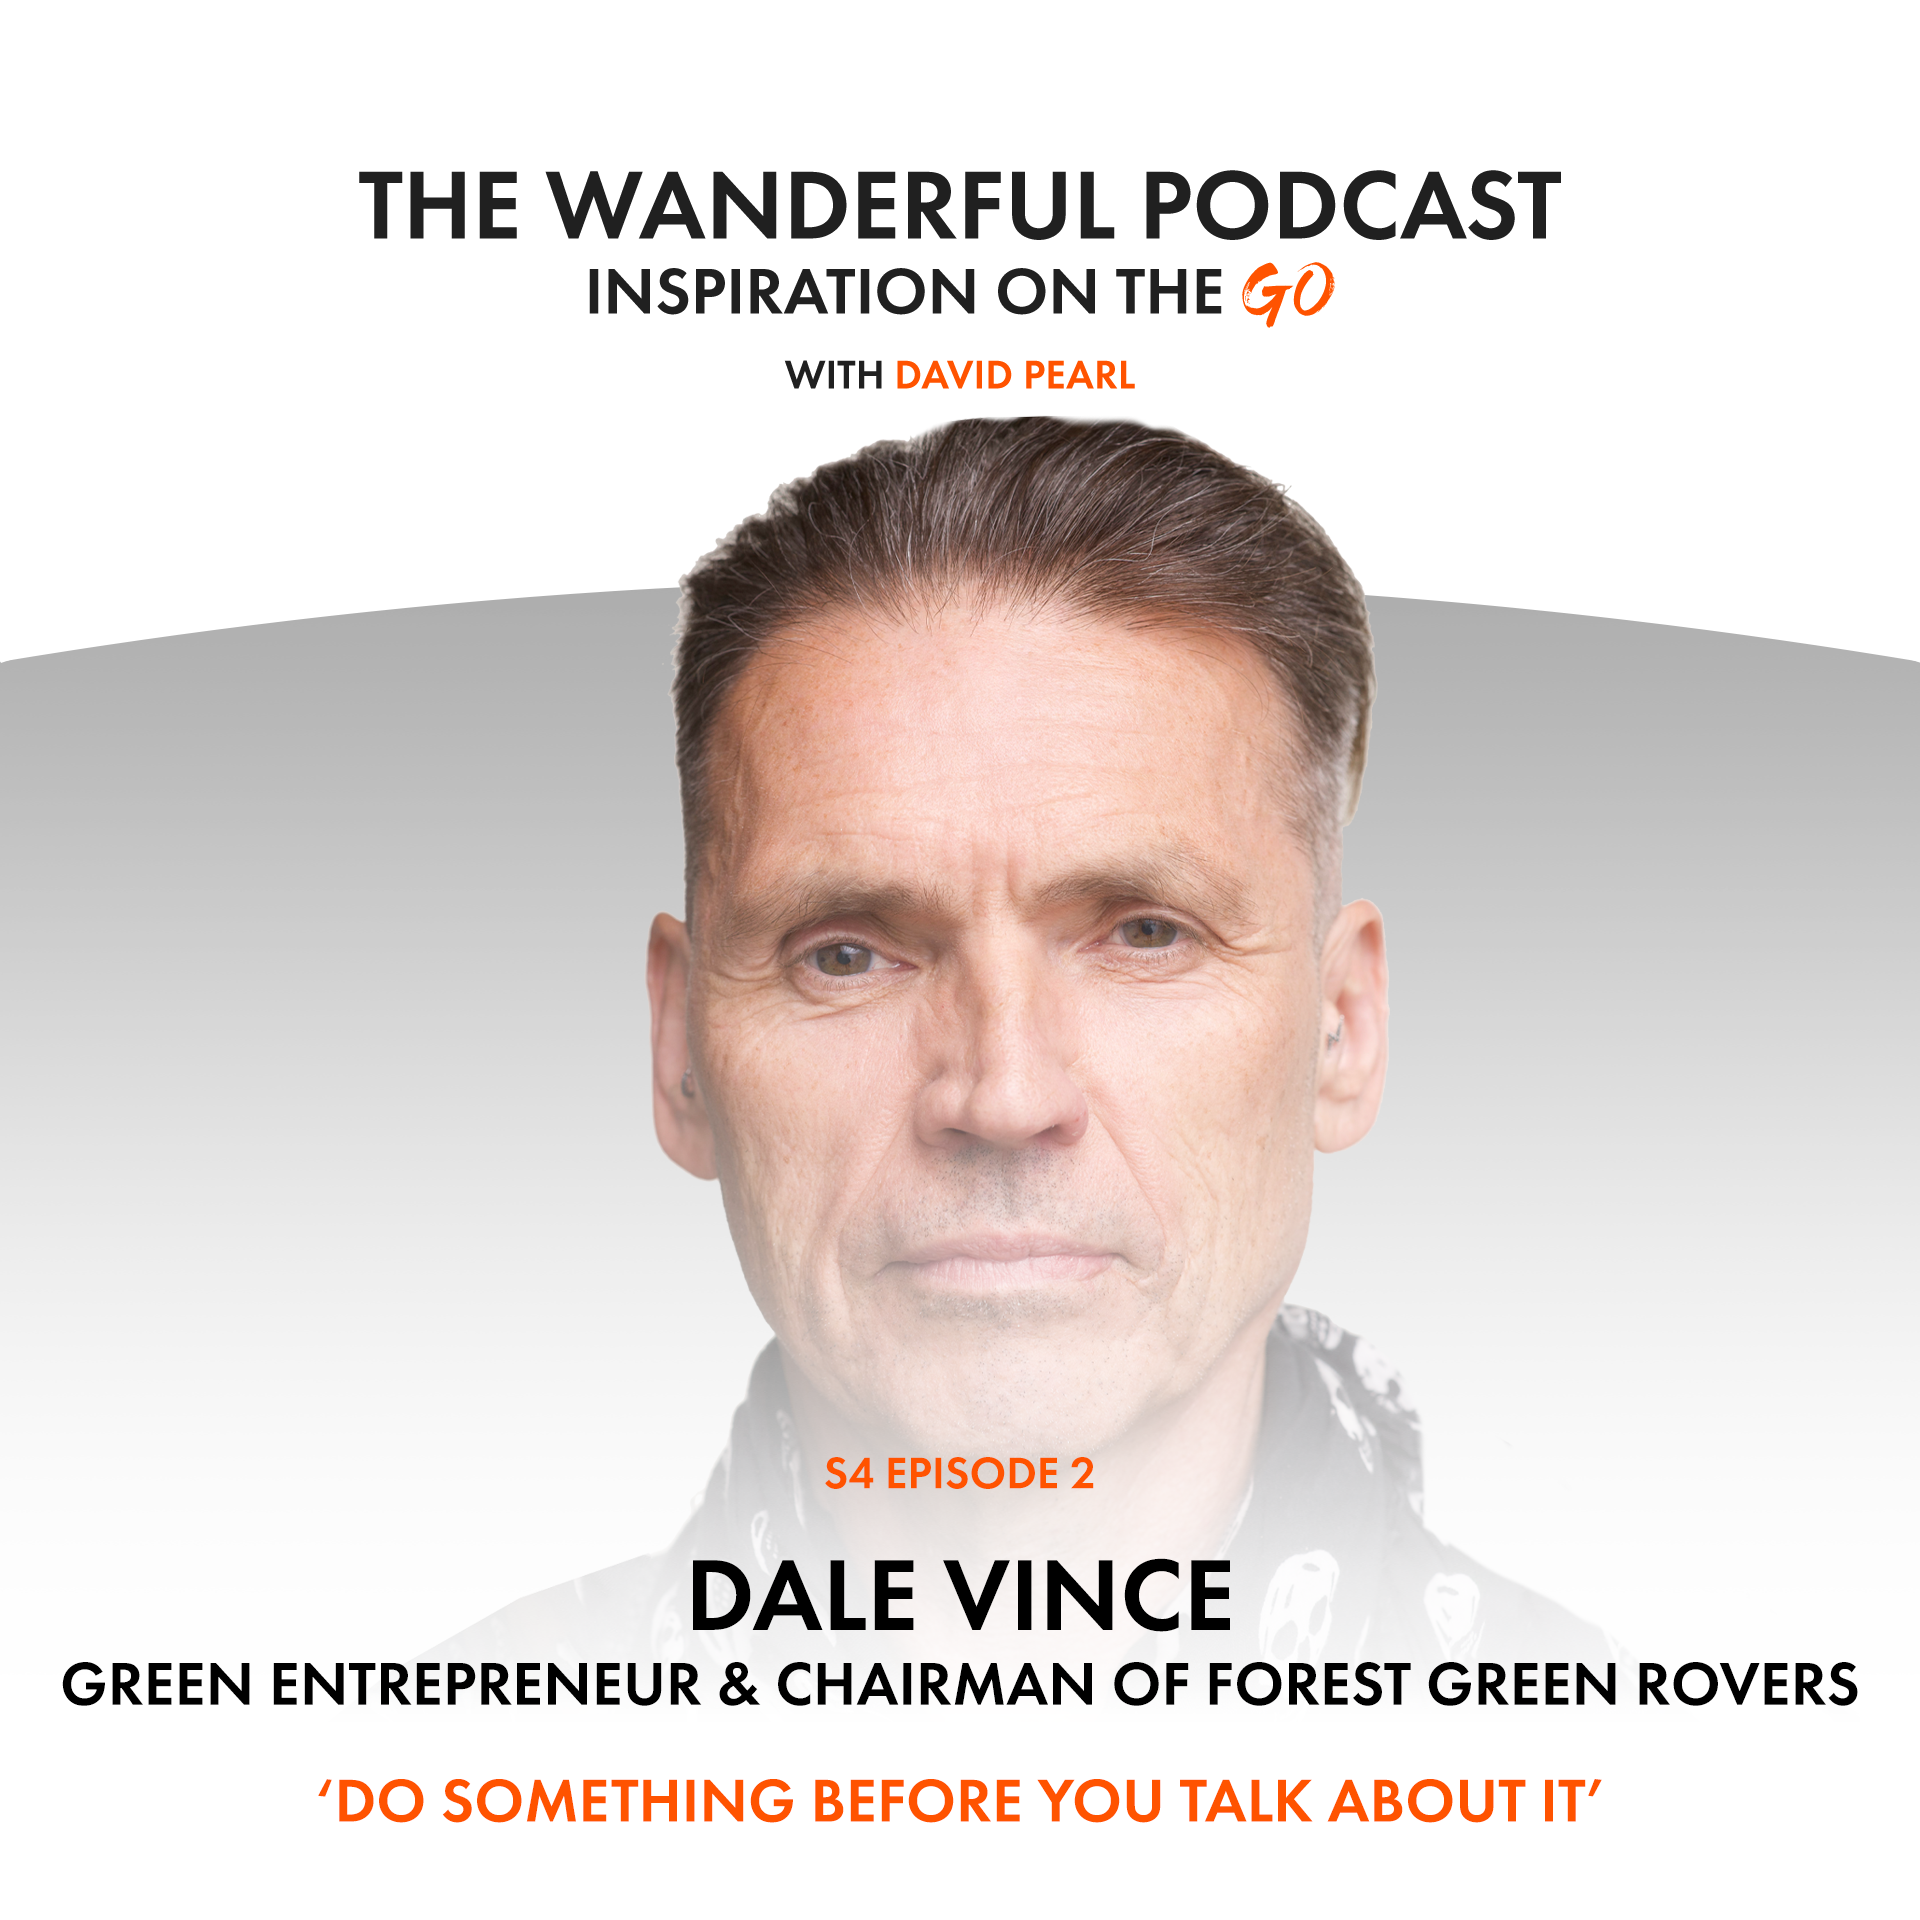 Dale Vince: The Wanderful Podcast with David Pearl